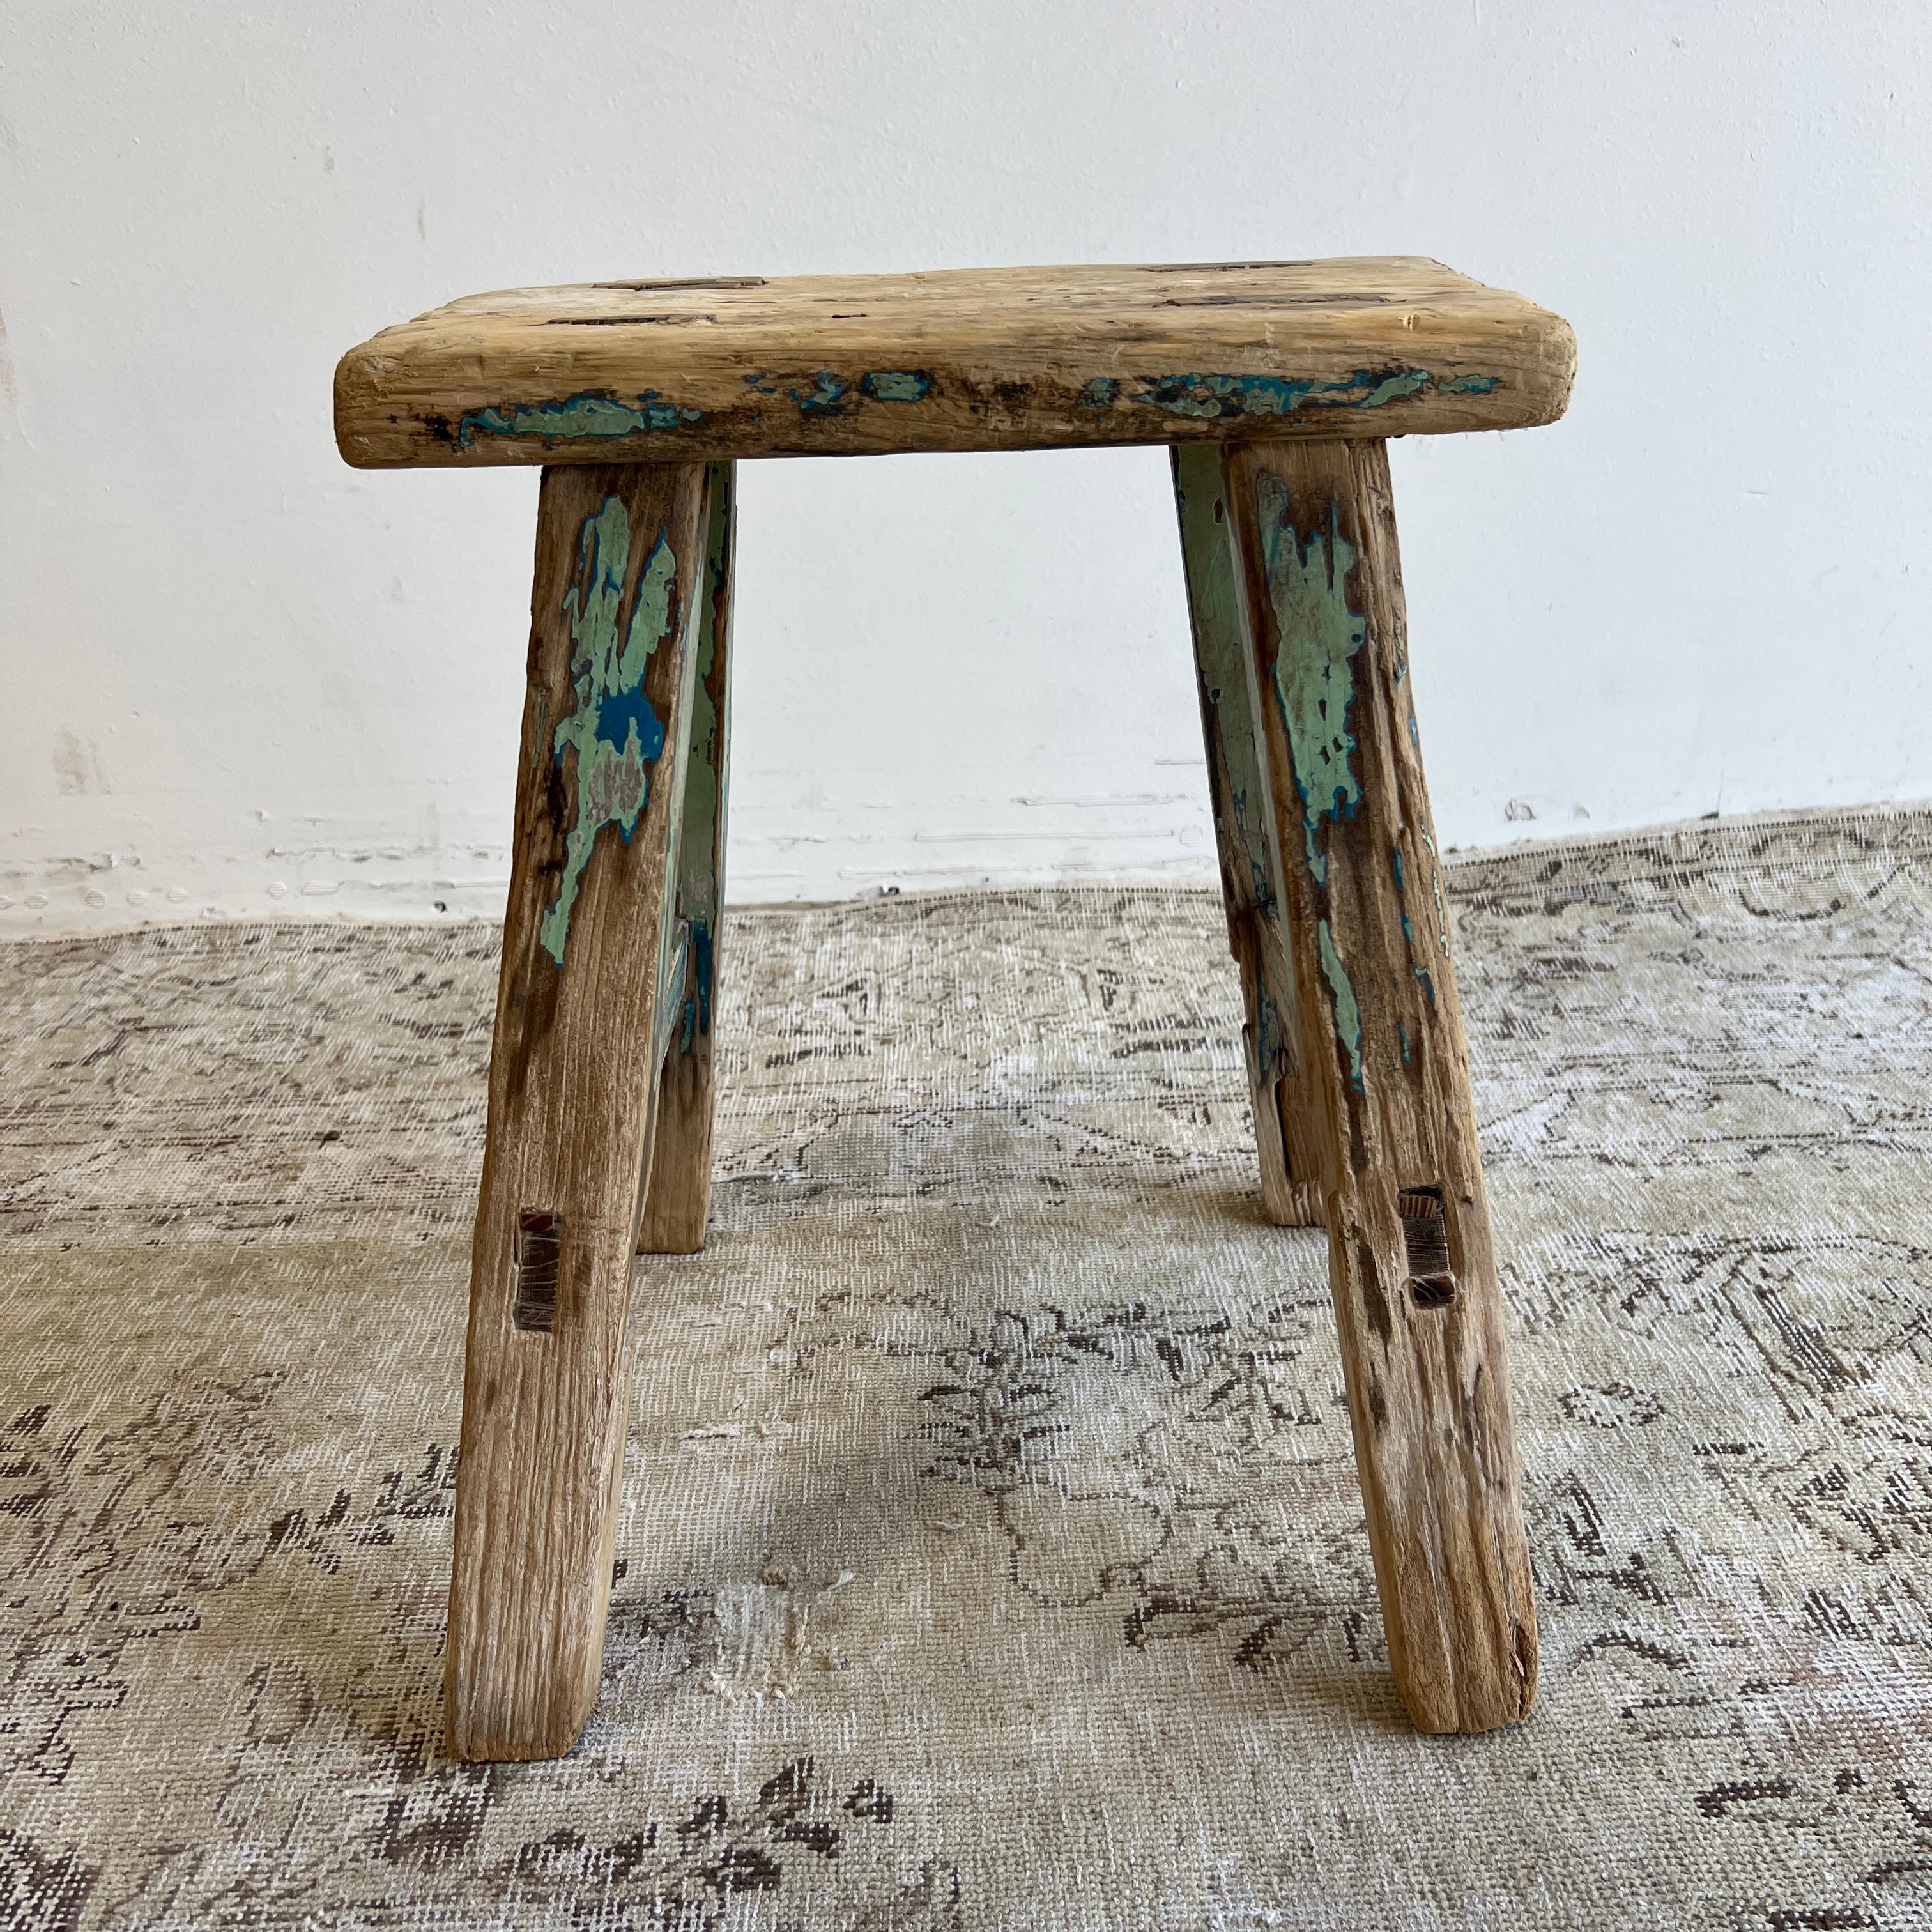 Vintage Antique elm wood stool These are the real vintage antique elm wood stools! Beautiful antique patina, with weathering and age, these are solid and sturdy ready for daily use, use as a table, stool, drink table, they are great for any space.